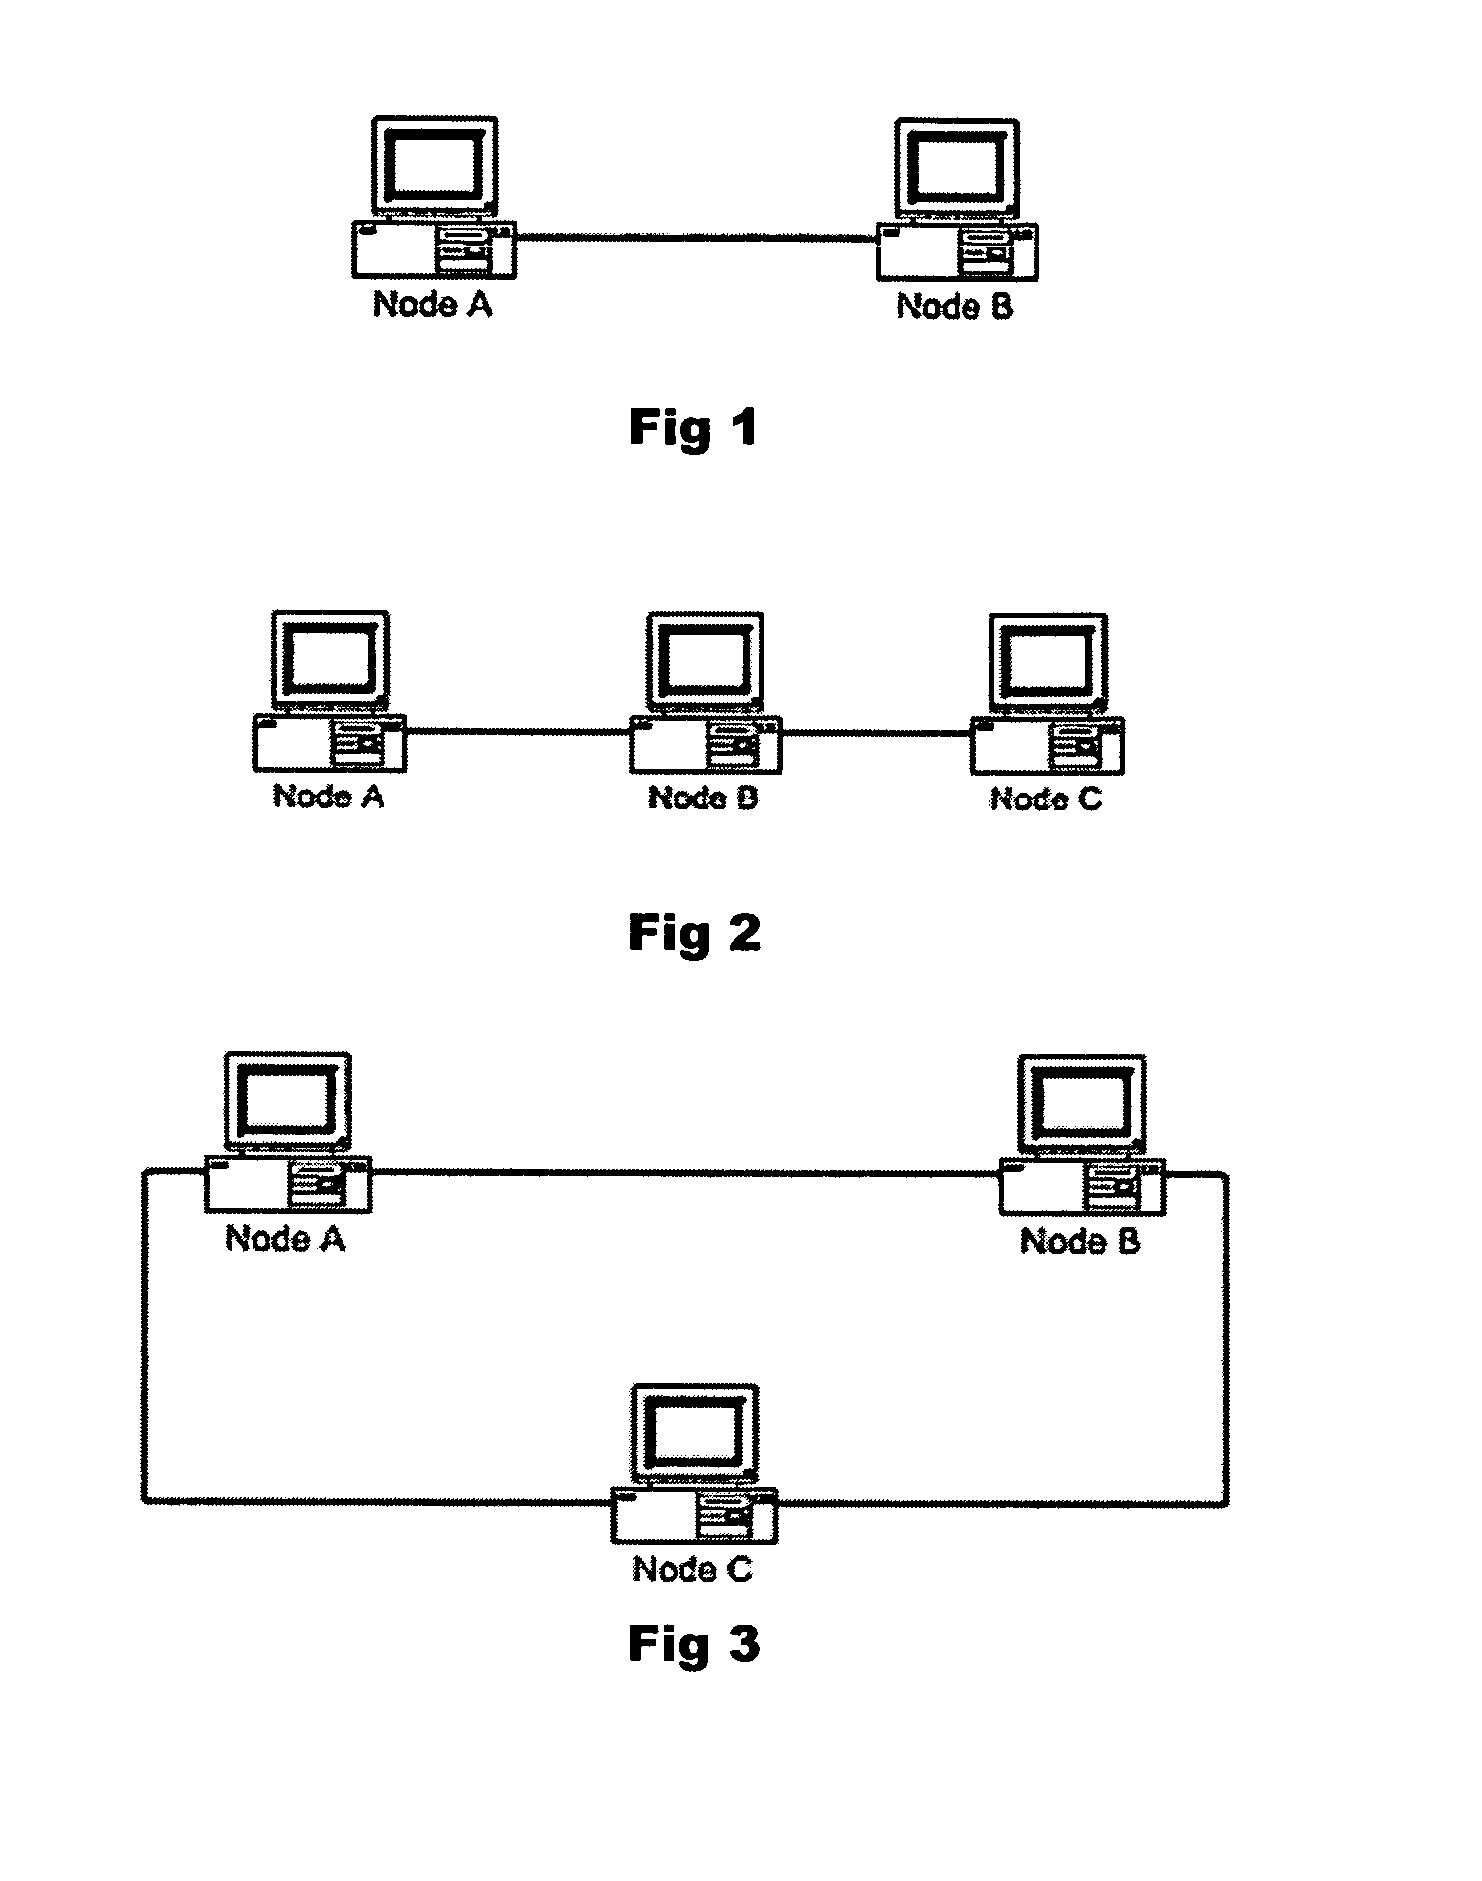 System for identifying the presence of Peer-to-Peer network software applications